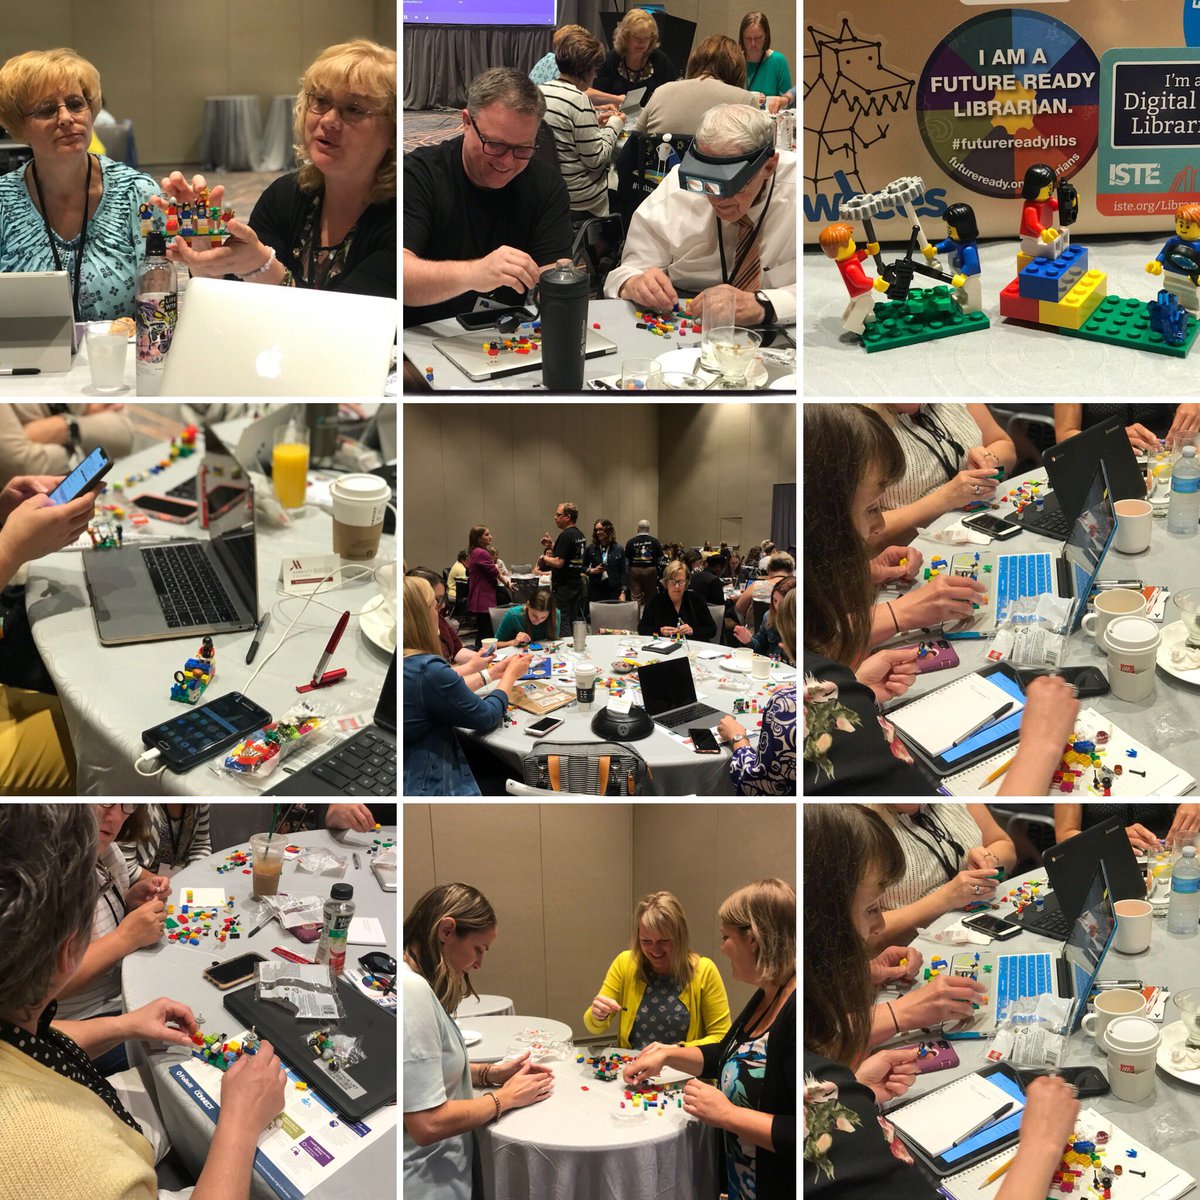 Kicking the day off at the Future Ready Librarians Summit with a @LEGO_Group Design Challenge and answering the question What does the future look like to your digital age learner? #futurereadylibs #futurelibs #iste18 #istelibs